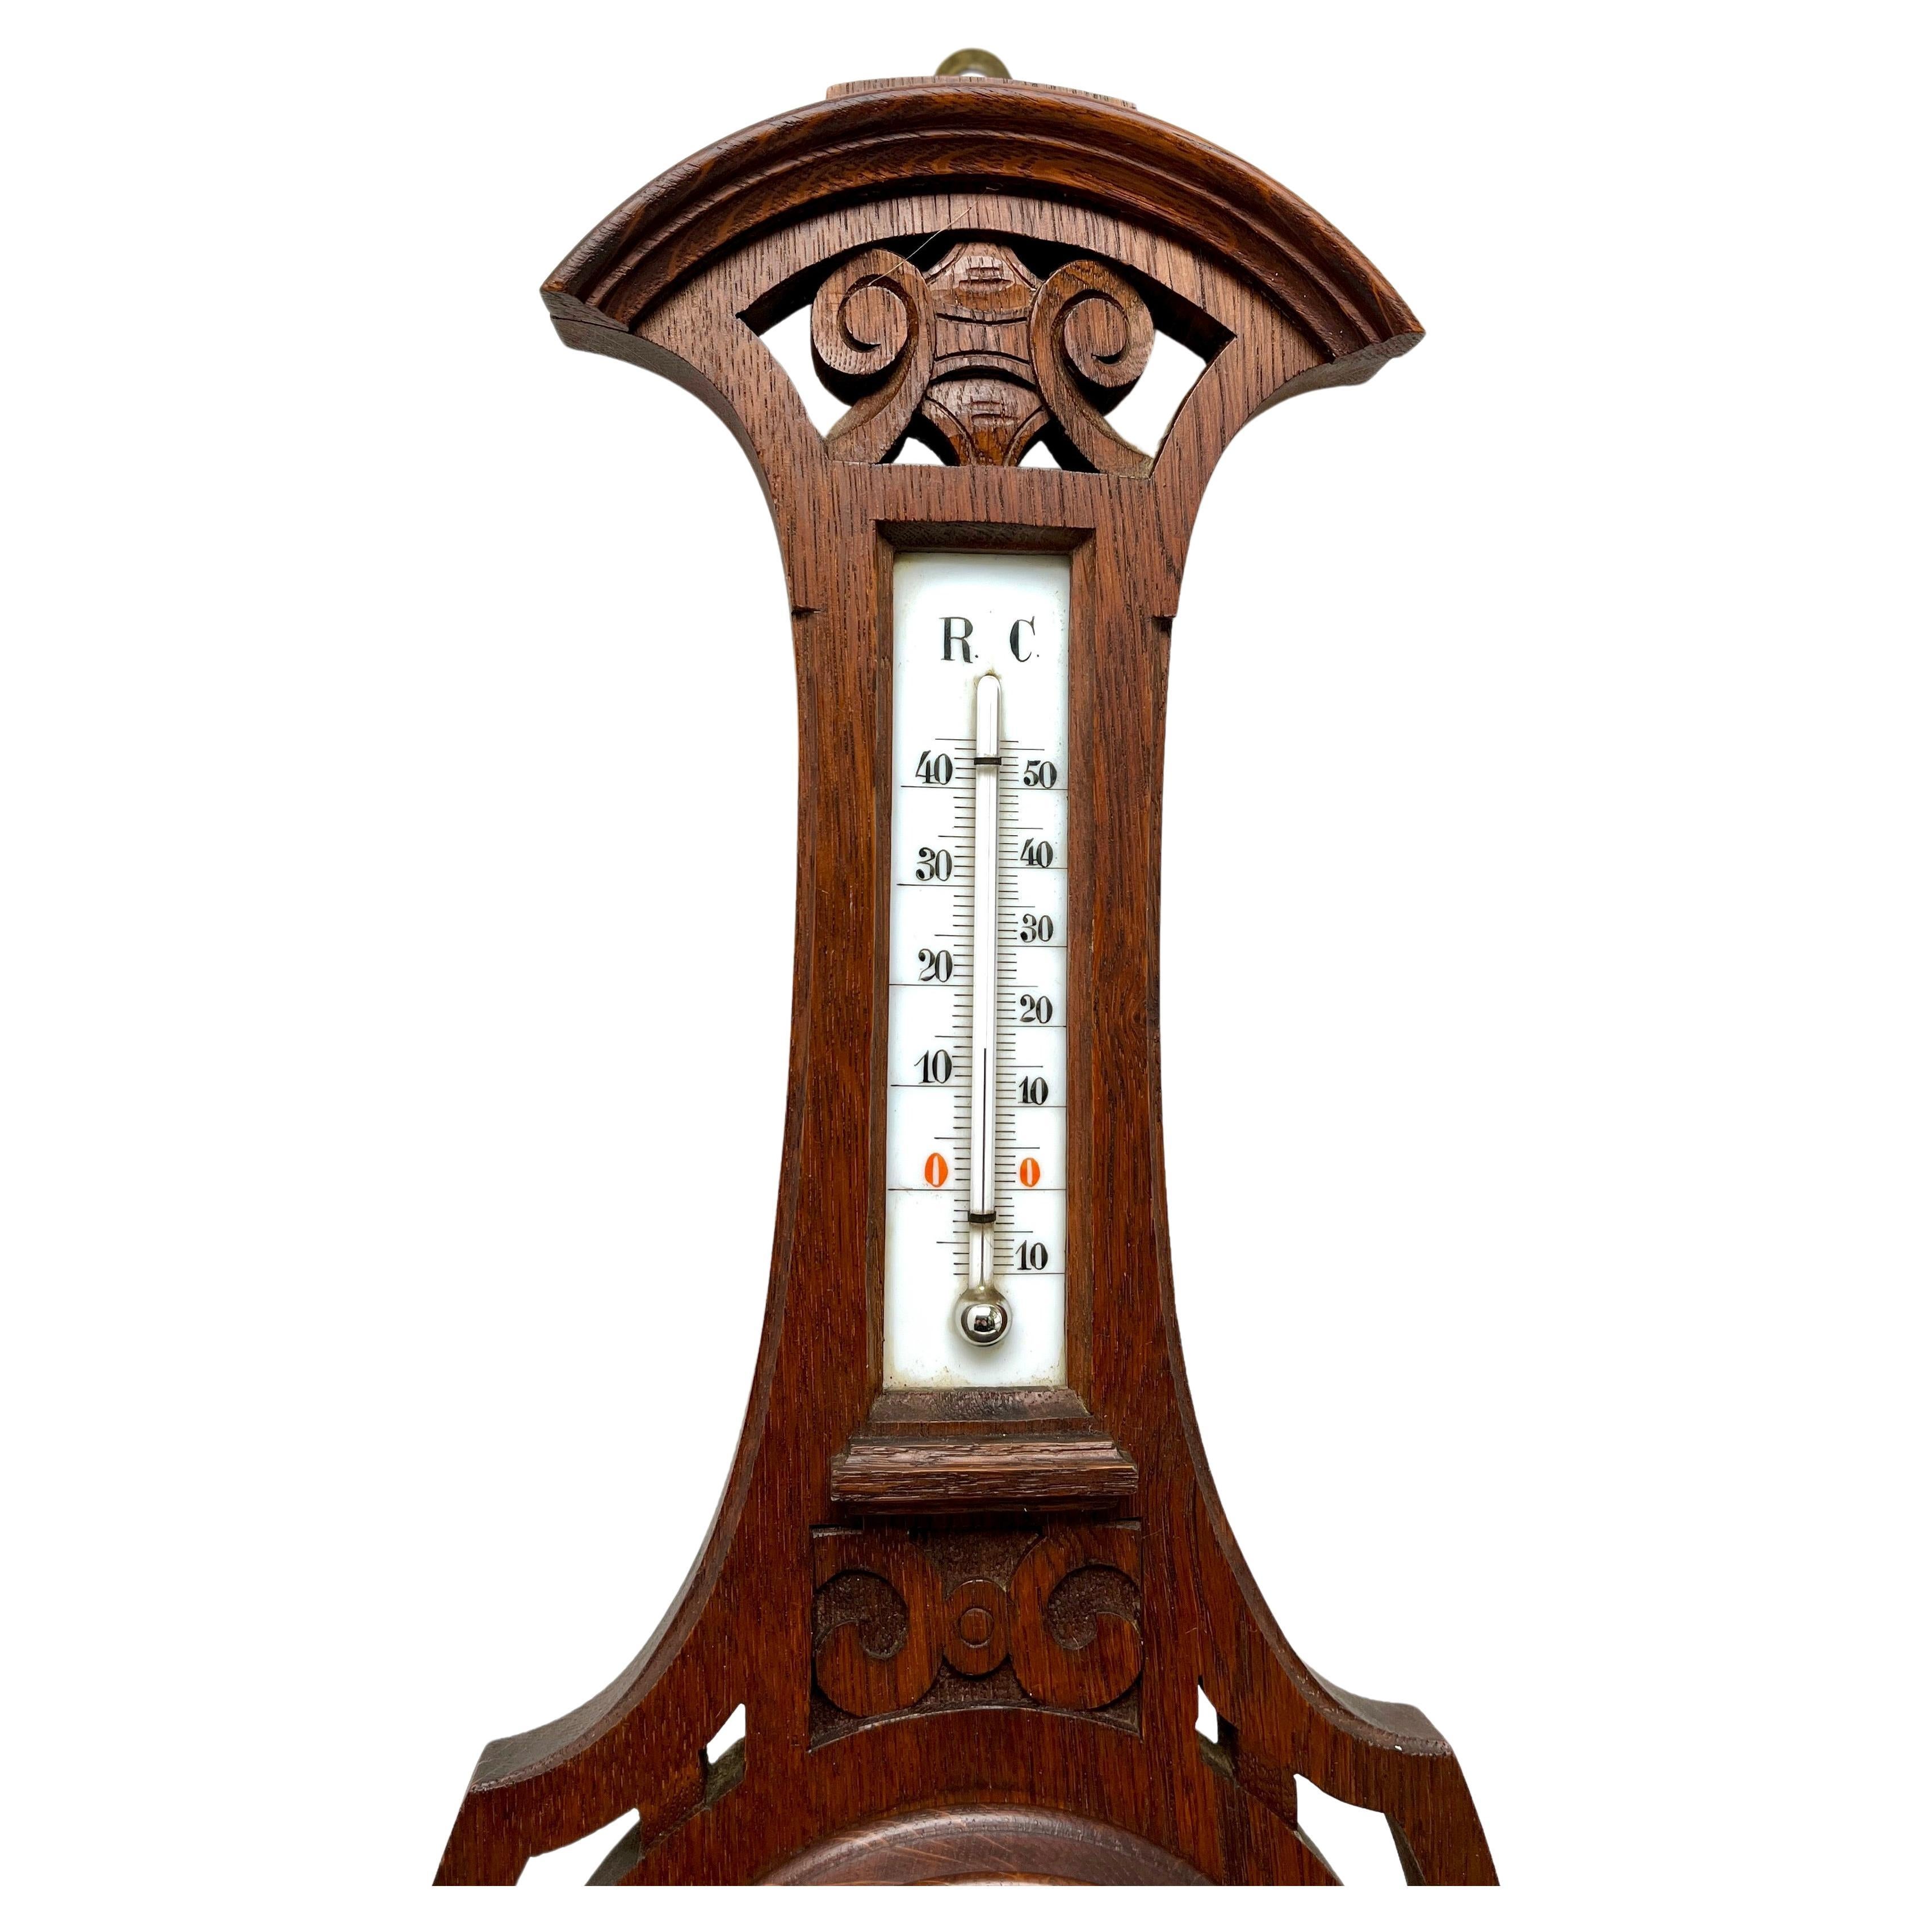 Wall-Mounted Weather Station in Art Nouveau Style Carved Oak By R. Krengel 1910s  Eupen Belgium
High quality mechanism with jeweled movement barometer and thermometer (in centigrade)
Unusual design with high relief C-scrolls and Flowers
 (from